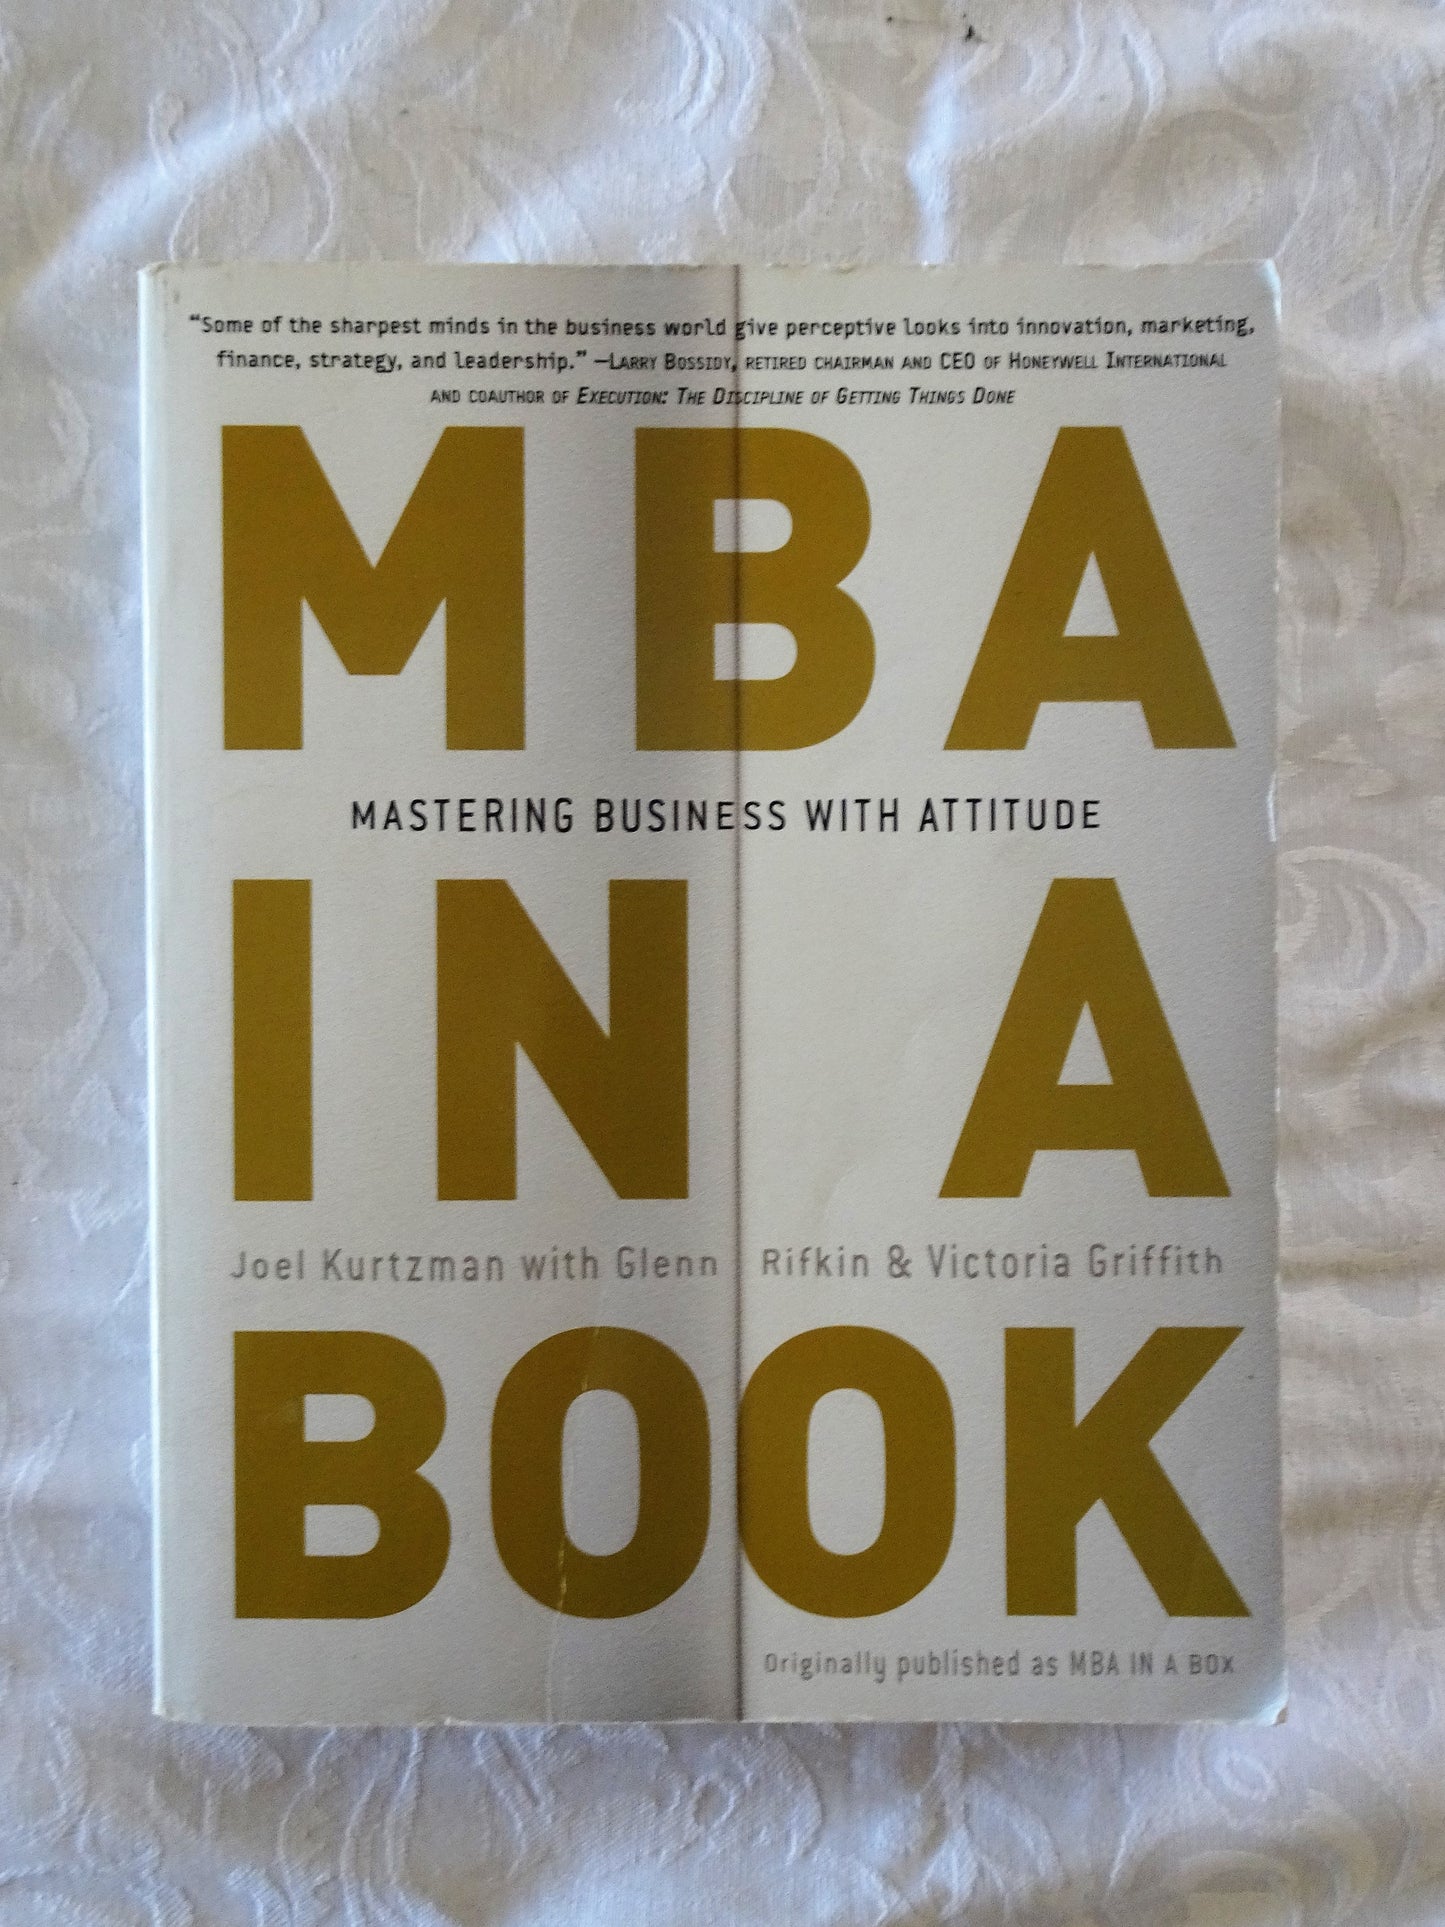 MBA In A Book  Mastering Business With Attitude  by Joel Kurtzman, Glenn Rifkin & Victoria Griffith 